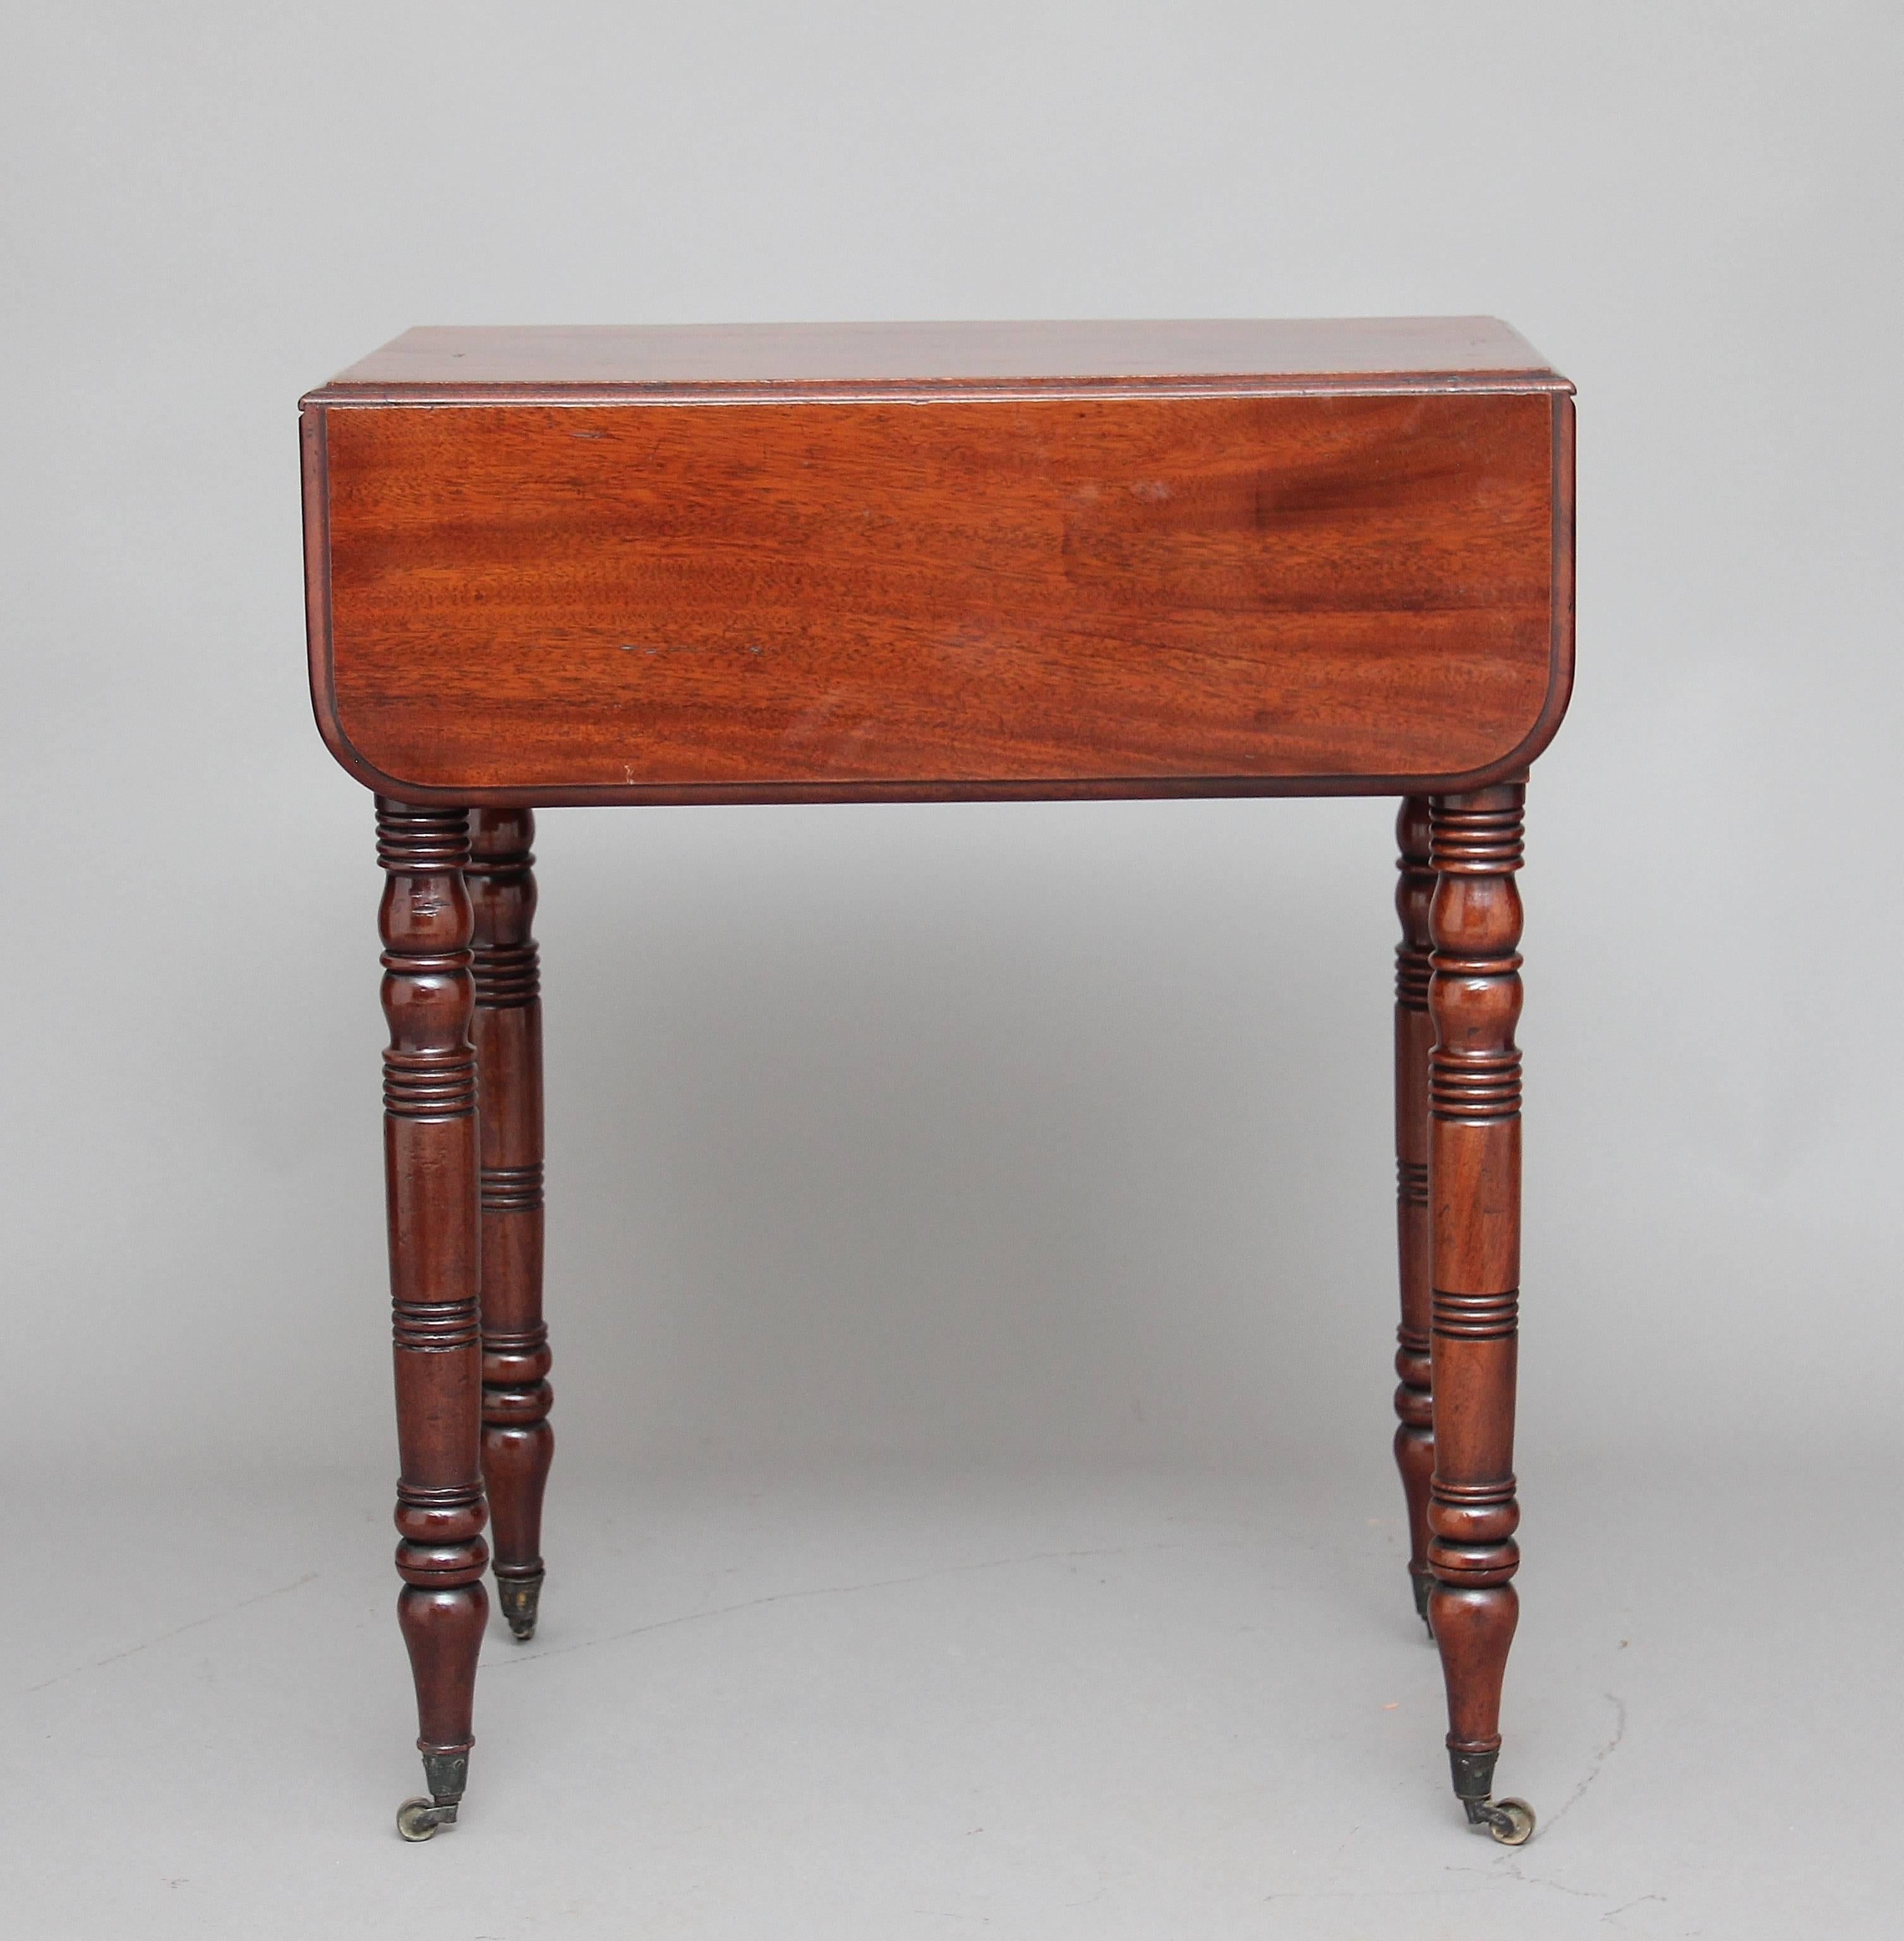 Great Britain (UK) 19th Century William iv Mahogany Drop Leaf Occasional Table